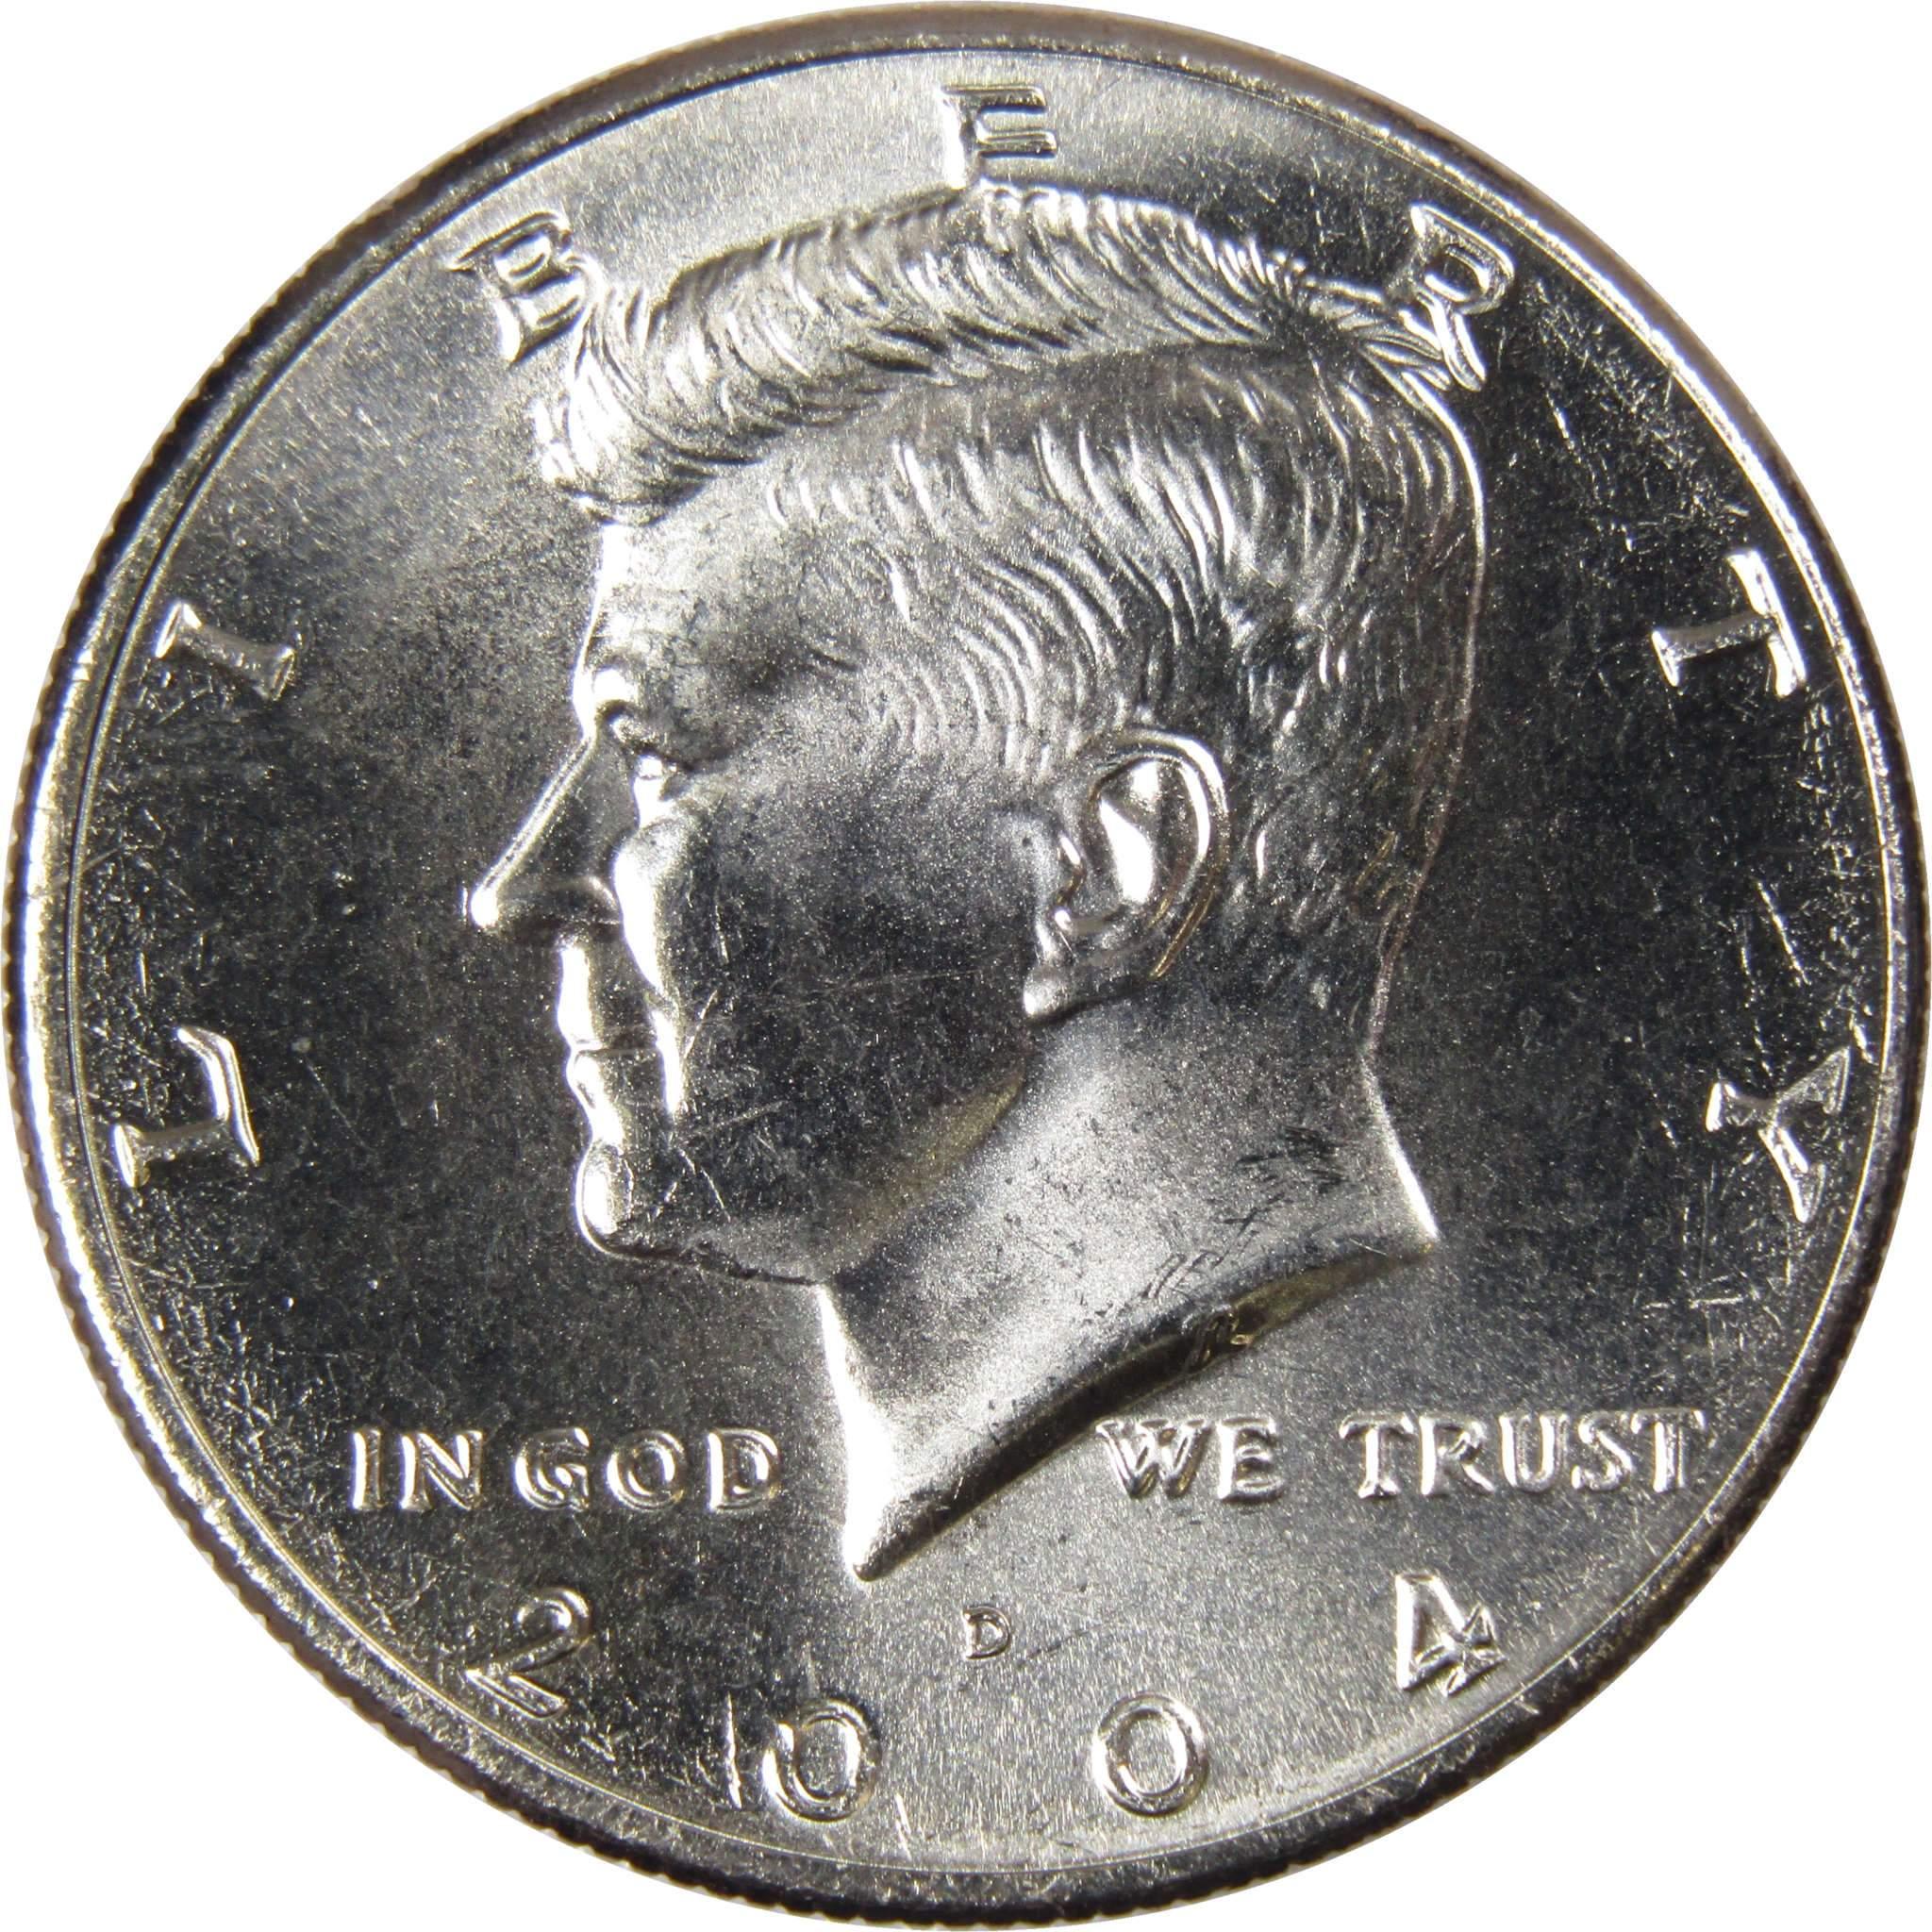 2004 D Kennedy Half Dollar BU Uncirculated Mint State 50c US Coin Collectible